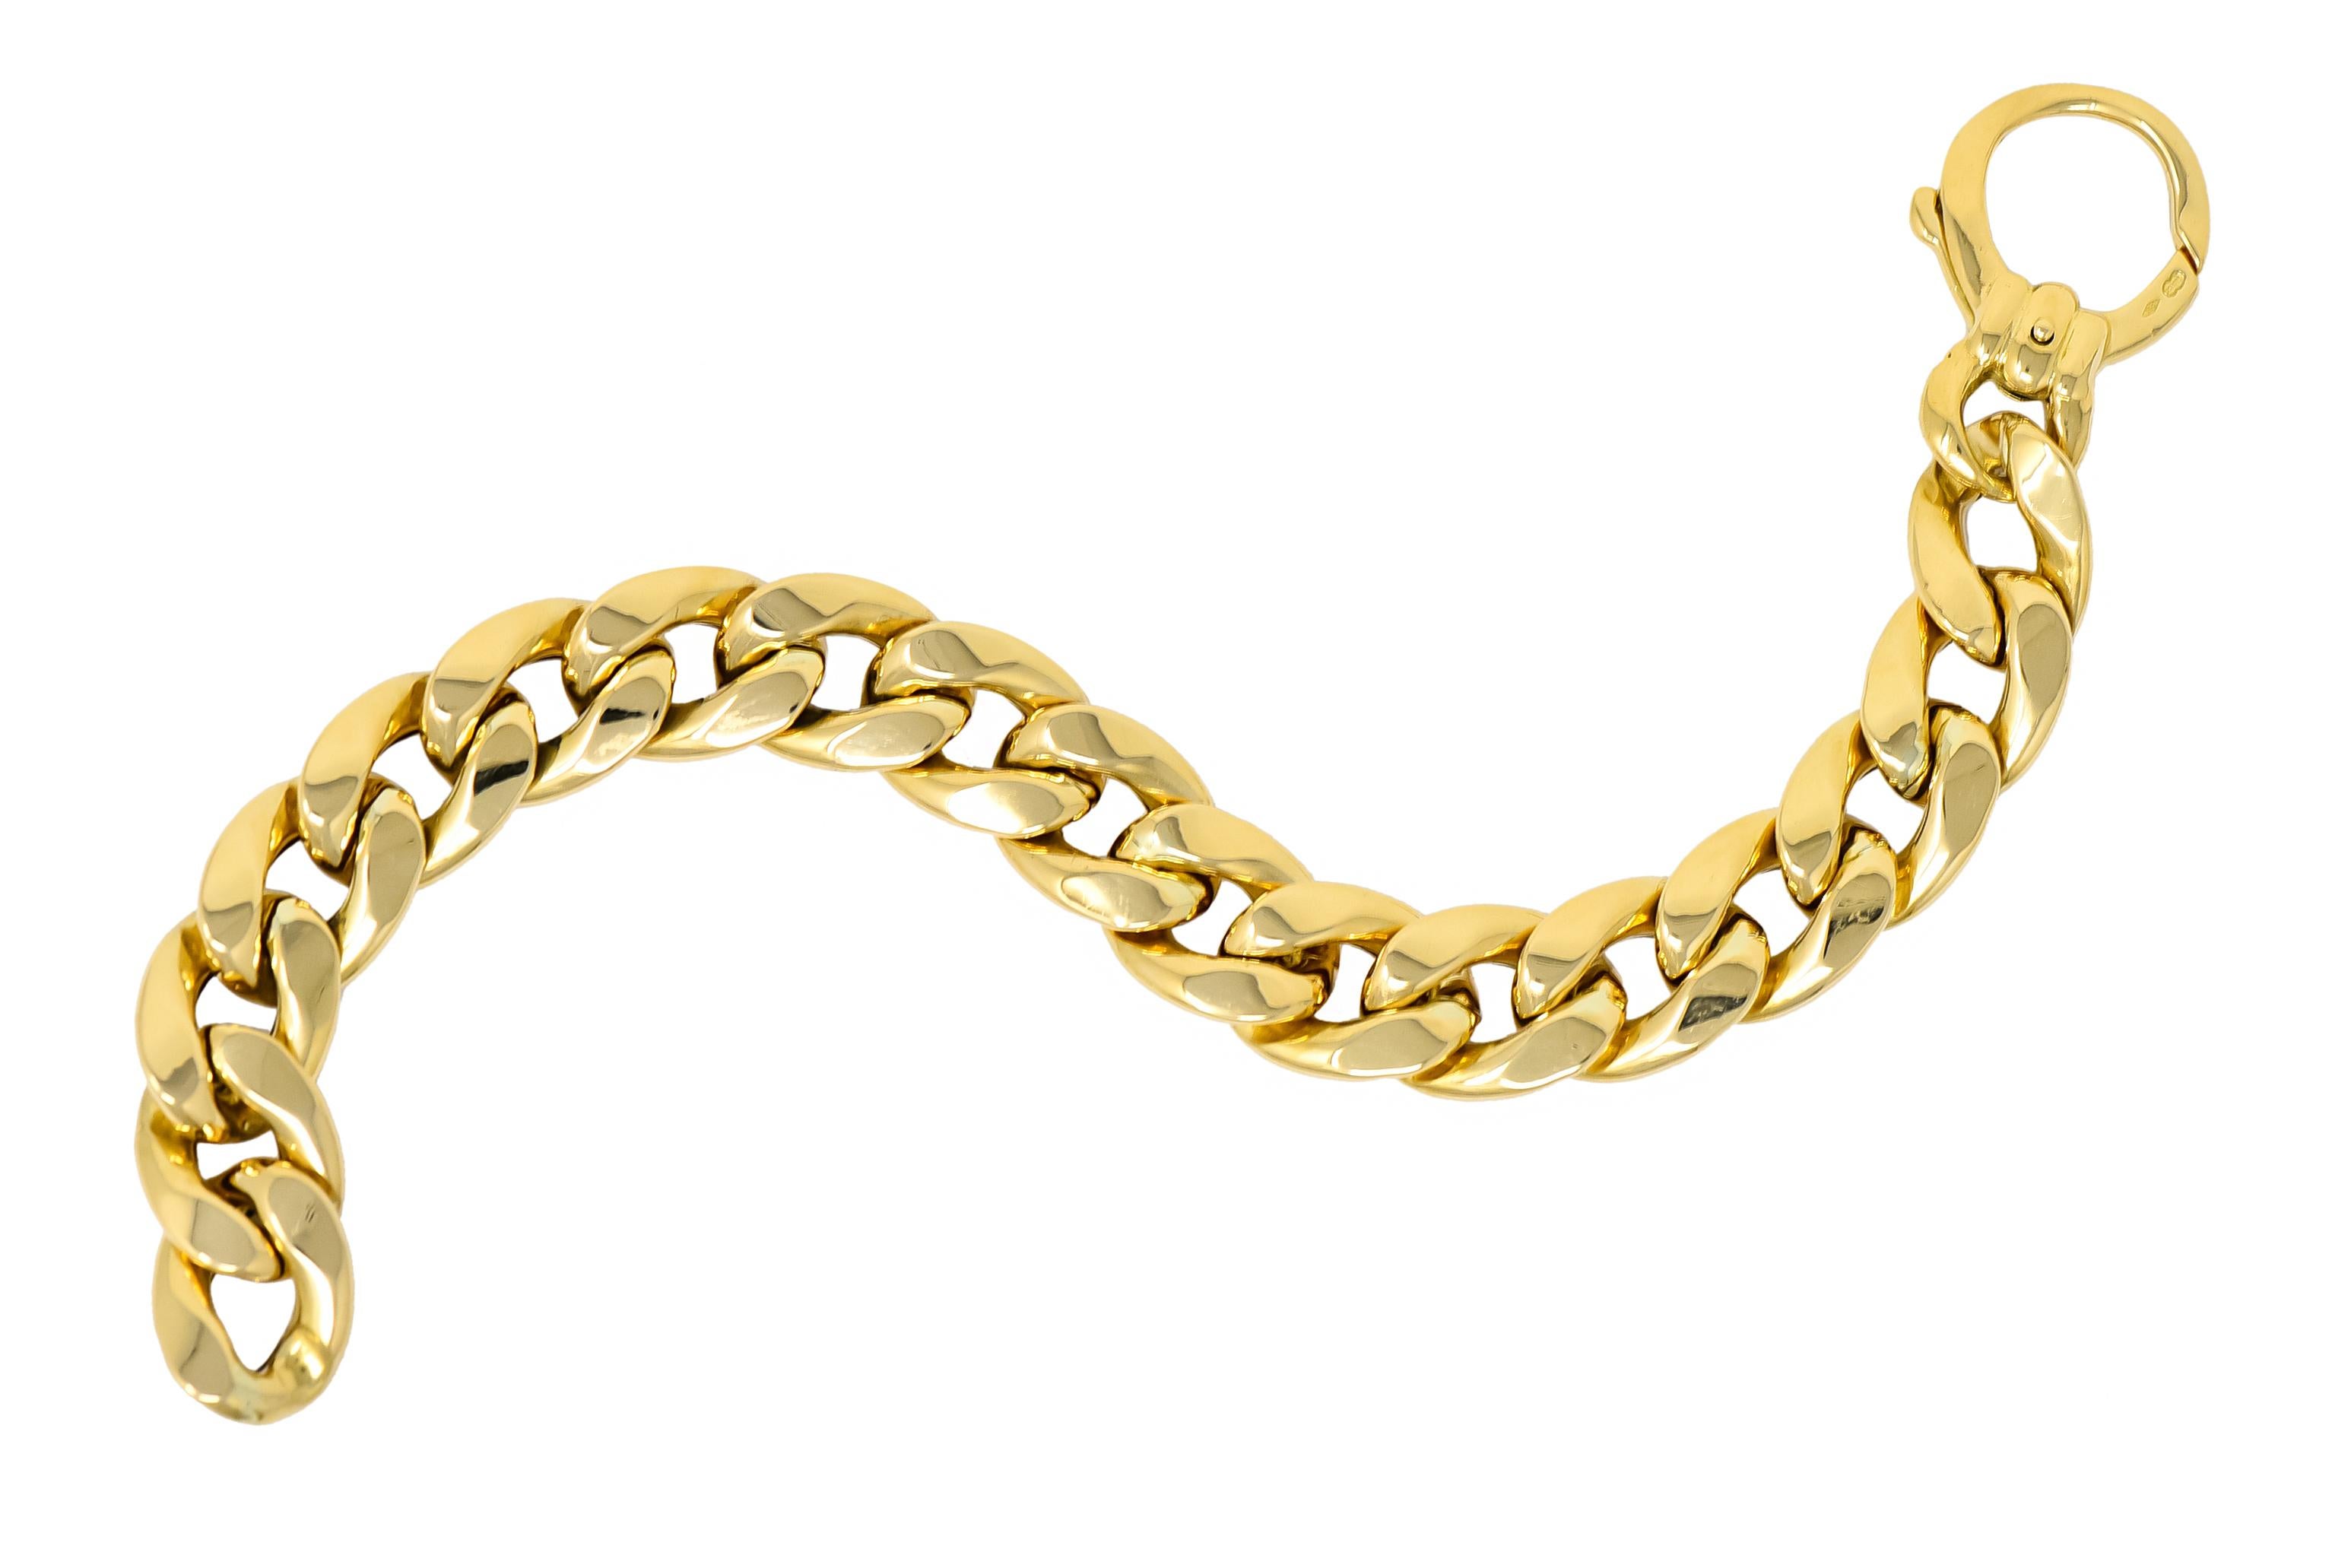 Link style bracelet designed as hollow curbed polished gold links

With large stylized lobster clasp

Fully signed Uno A Erre with Italian assay marks for Arezzo Italy

Stamped 750 for 18 karat gold

Length: 7 3/4 inches

Width: 3/4 (widest)